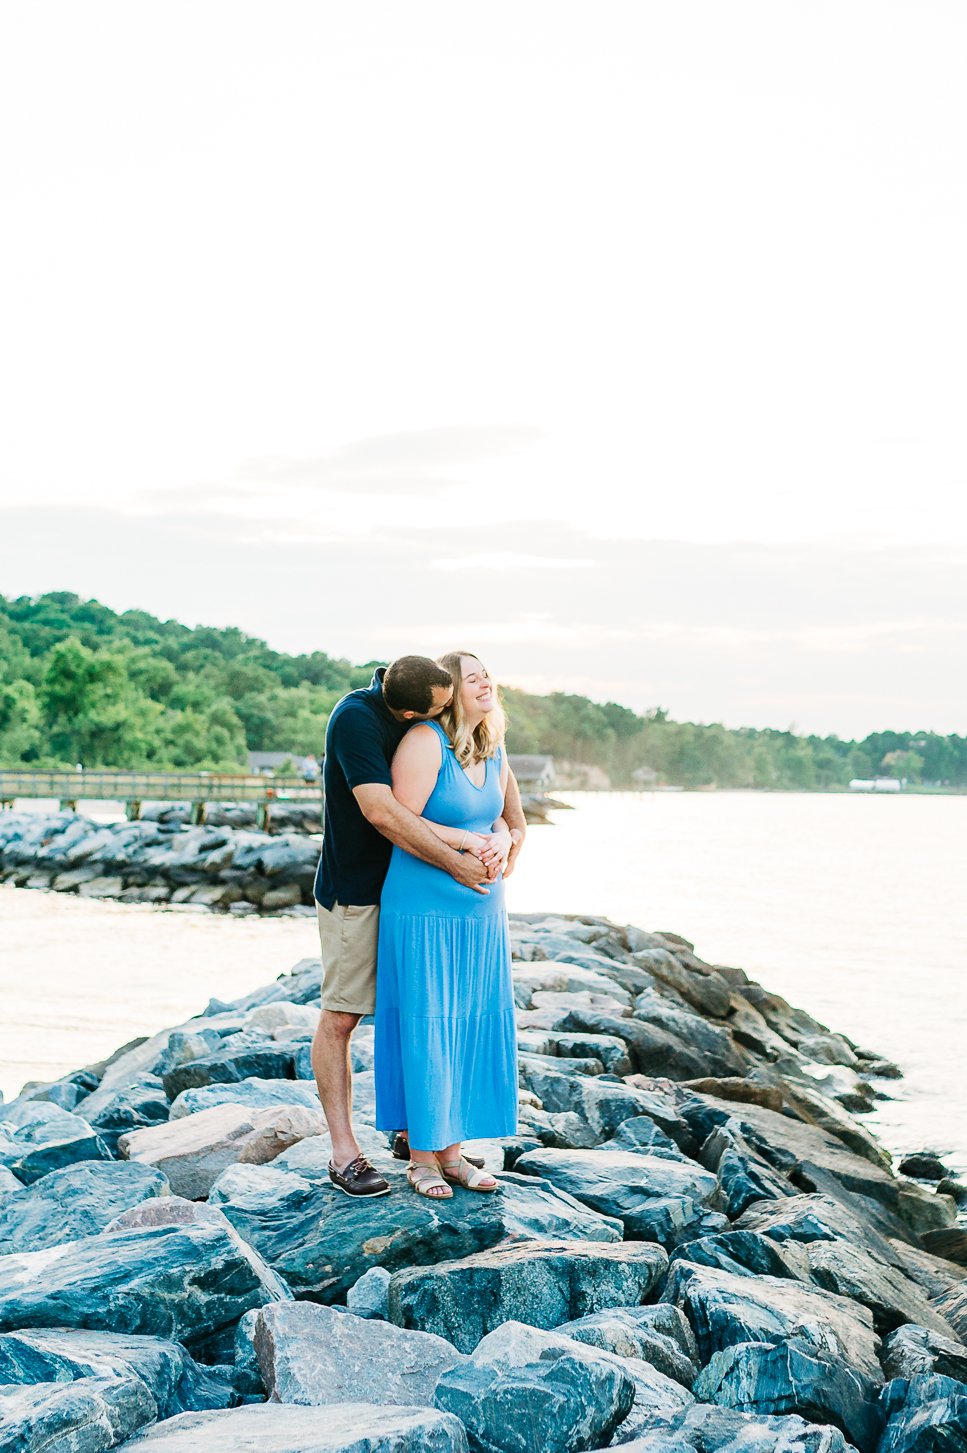 Engagement_Westmoreland_Summer_youseephotography_LeslieNick_blogpic00021a.jpg